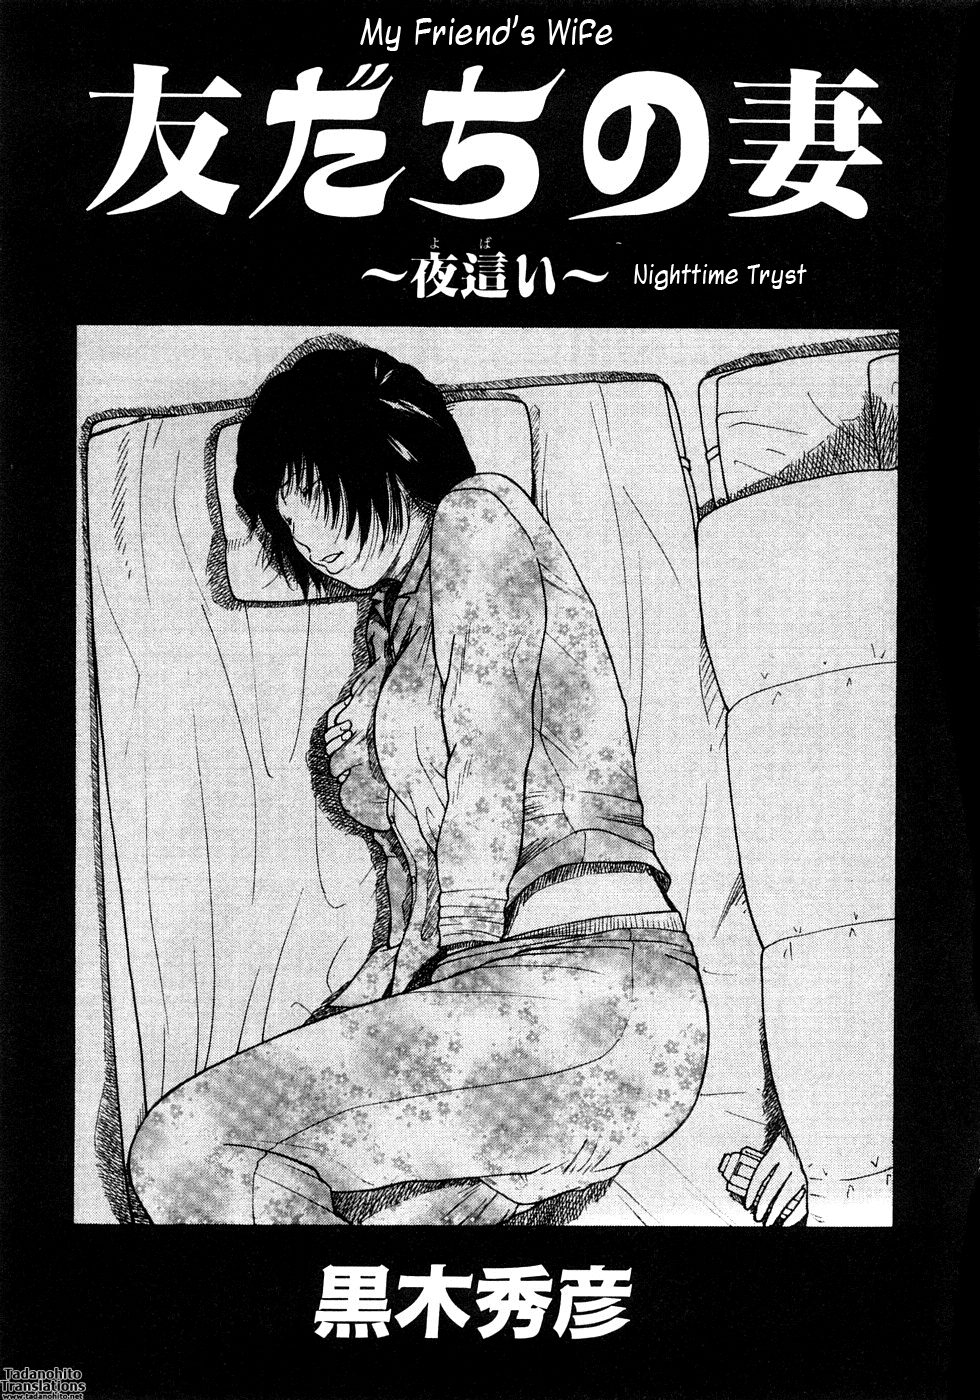 Hentai Manga Comic-29 Year Old Lusting Wife-Chapter 4-My Friend's Wife-1